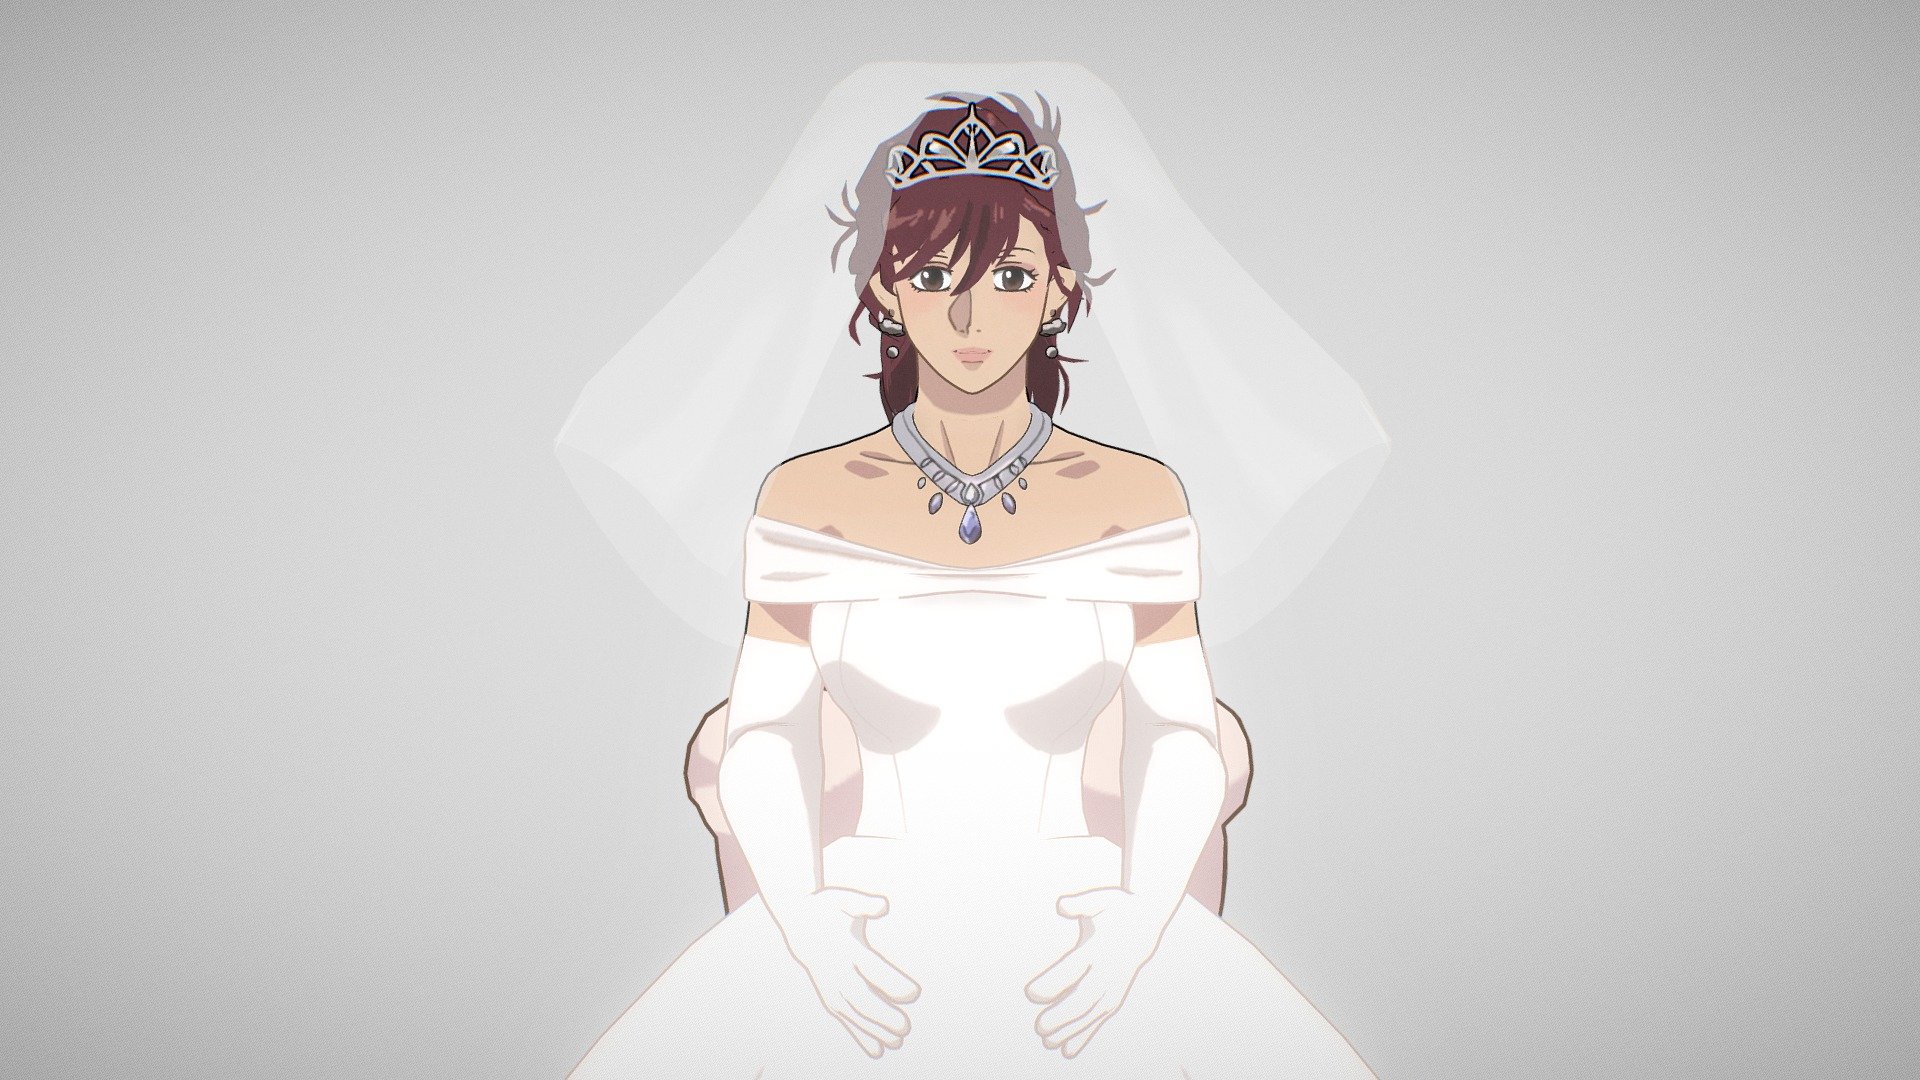 Kaori from city hunter in a wedding dress in Private Eyes film.
Made in Blender - Kaori - City Hunter - (Private Eyes) - 3D model by Romélus 3D -Open for Commissions- (@Romelus) 3d model